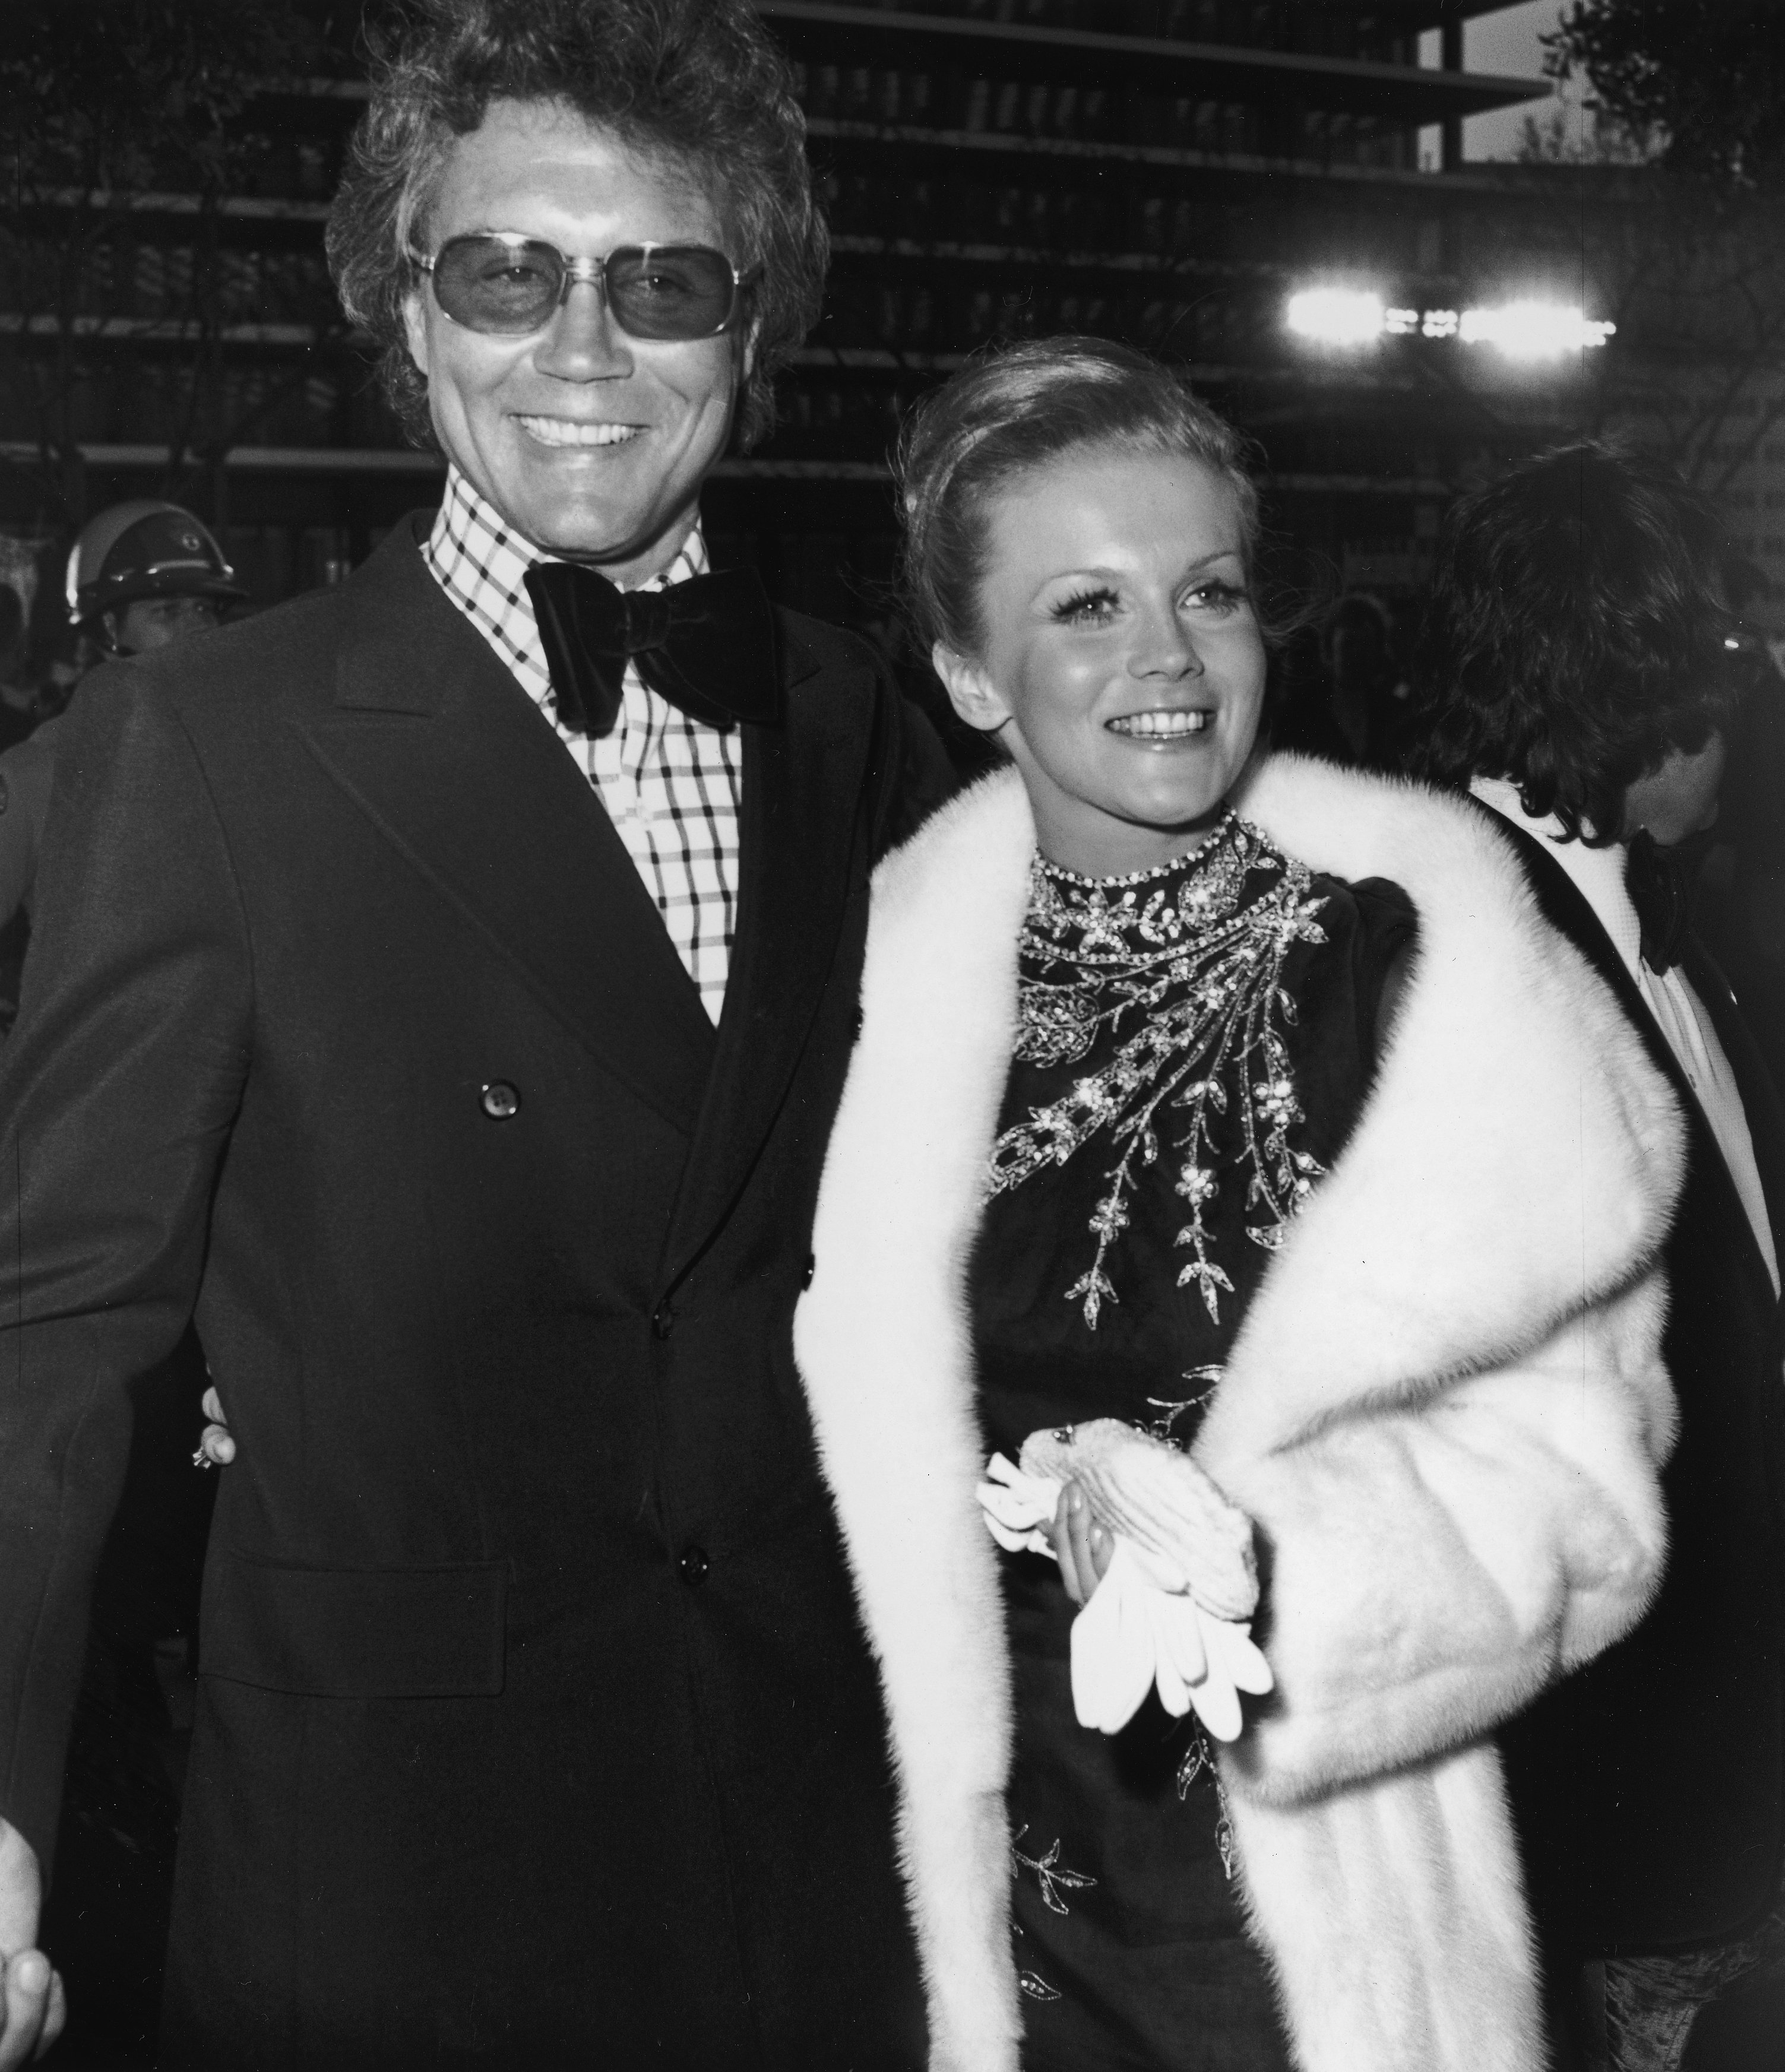  Swedish-born actor Ann-Margret and her husband, American actor Roger Smith, smile at the 44th Annual Academy Awards, Dorothy Chandler Pavilion, L.A. County Music Center, Los Angeles, California on April 10 1972 | Source: Getty Images